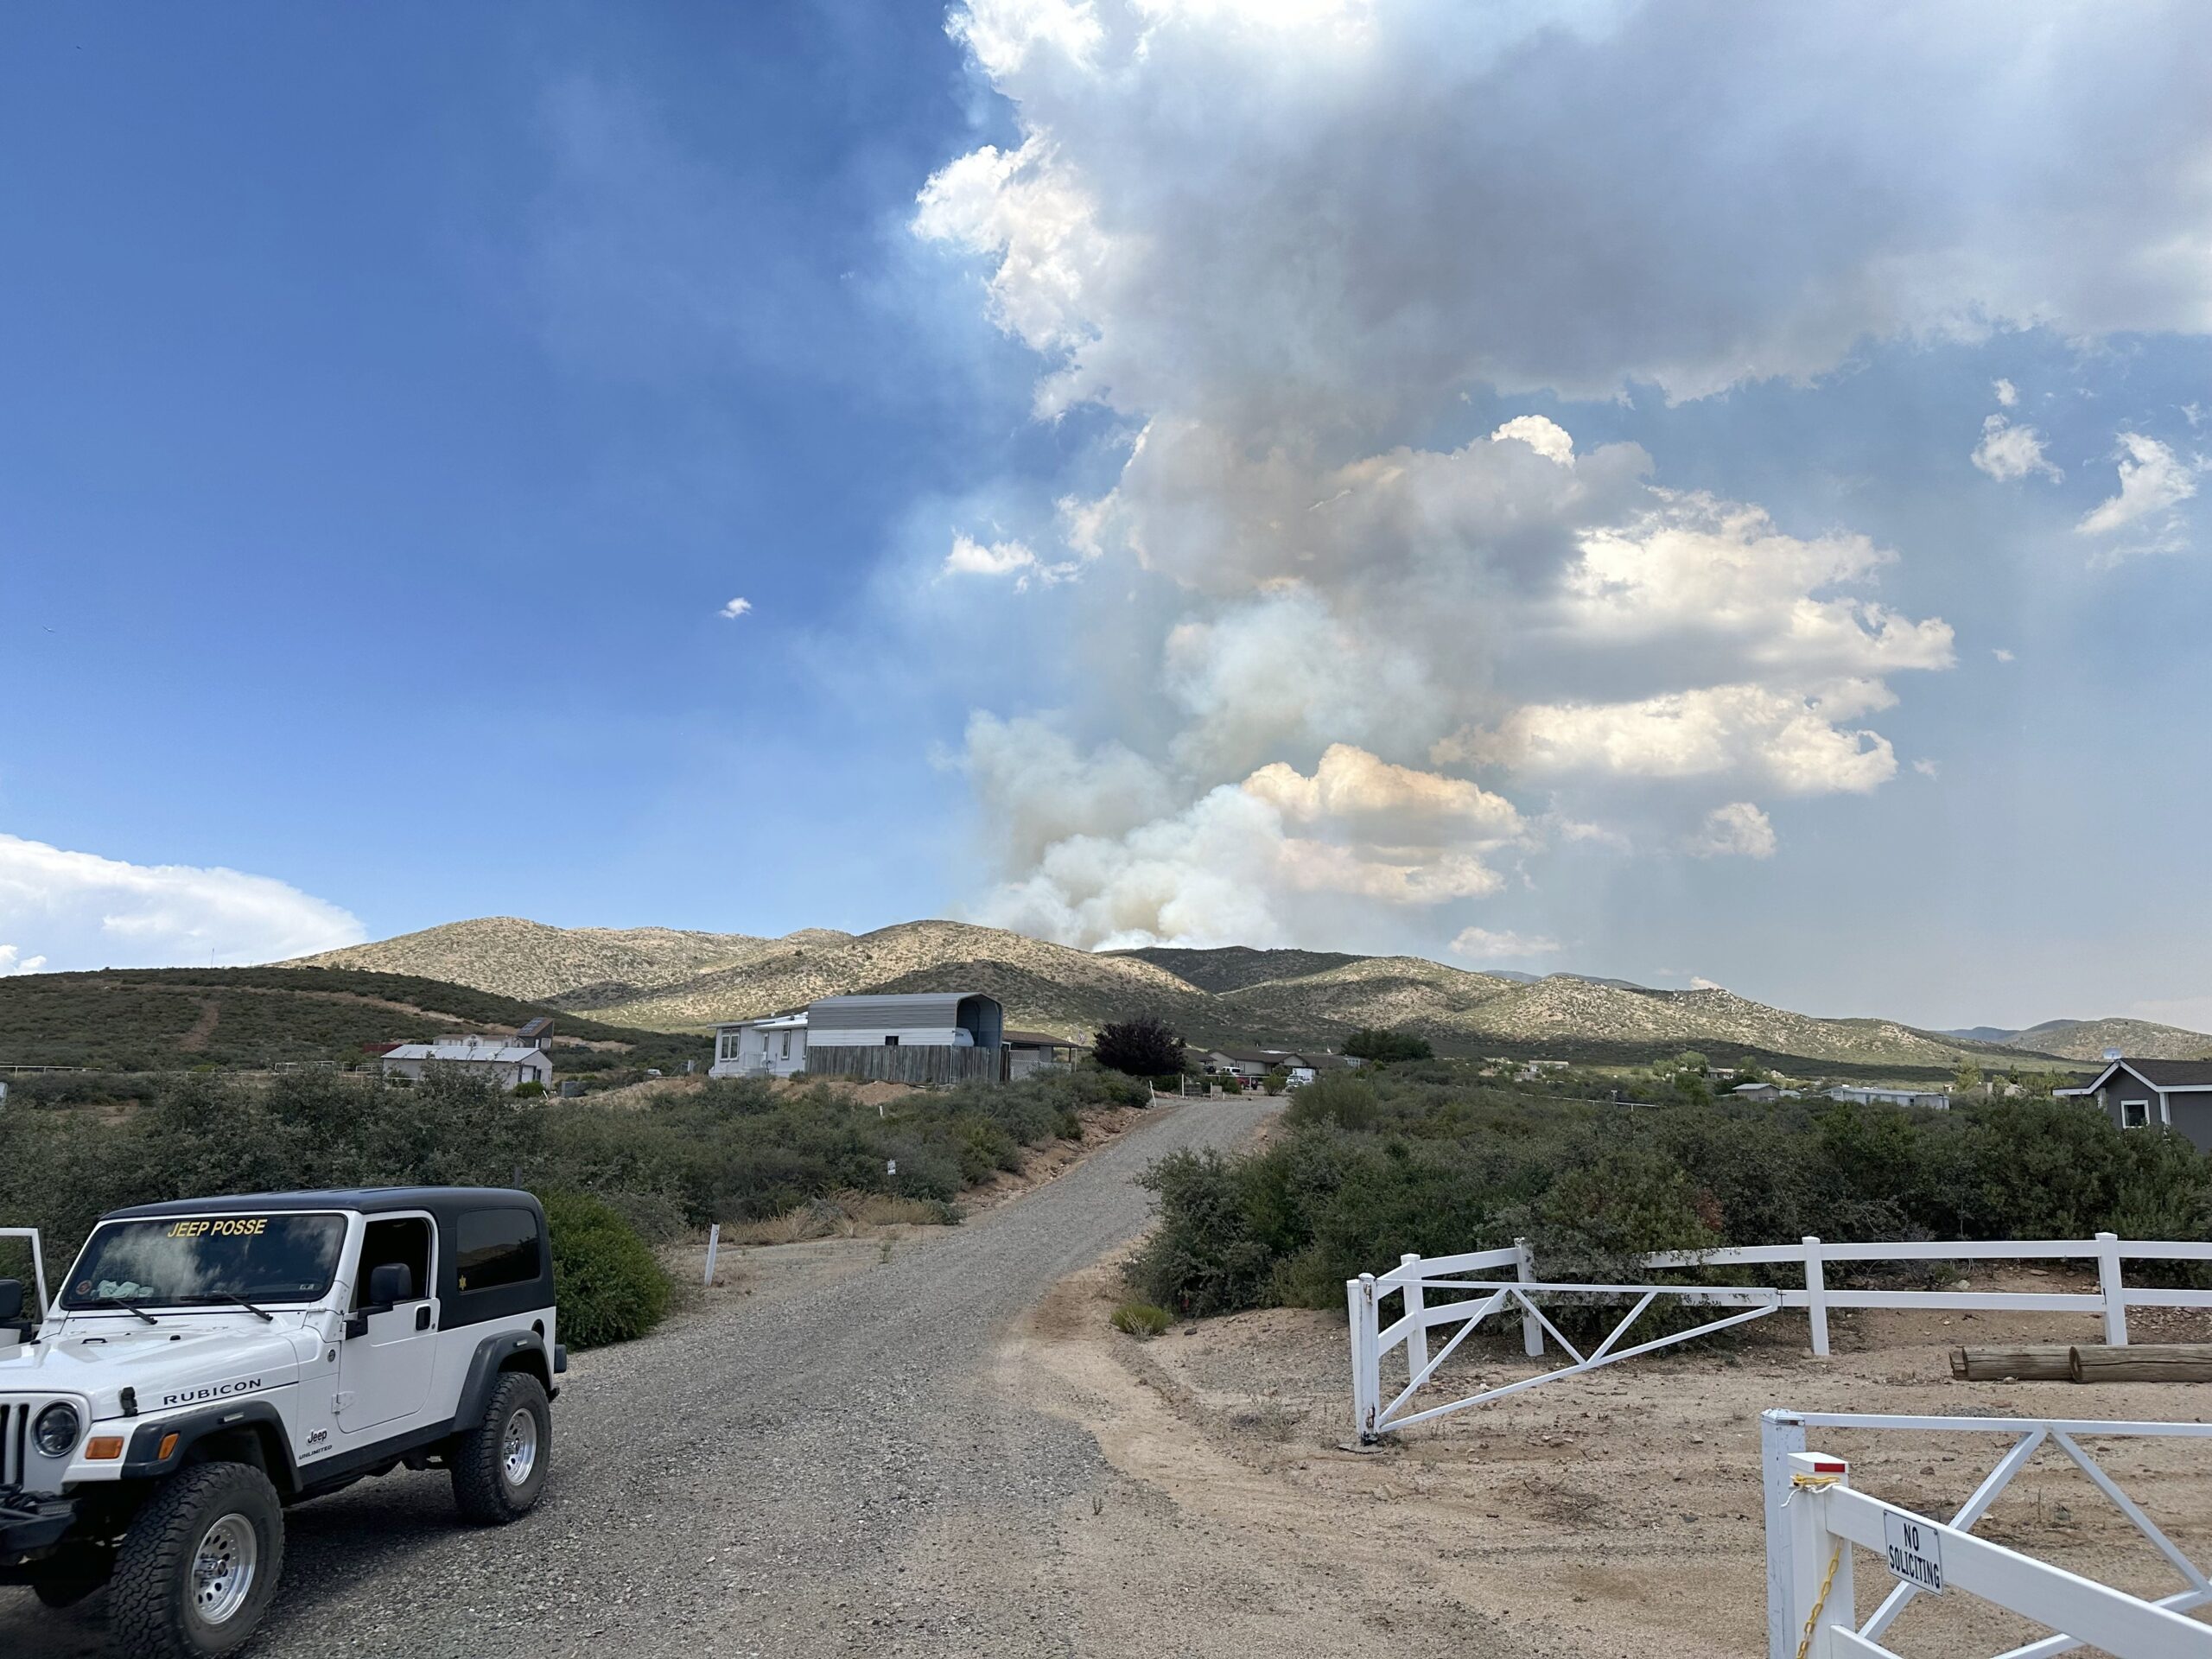 View of Grapevine fire from the White Horse Ranch community